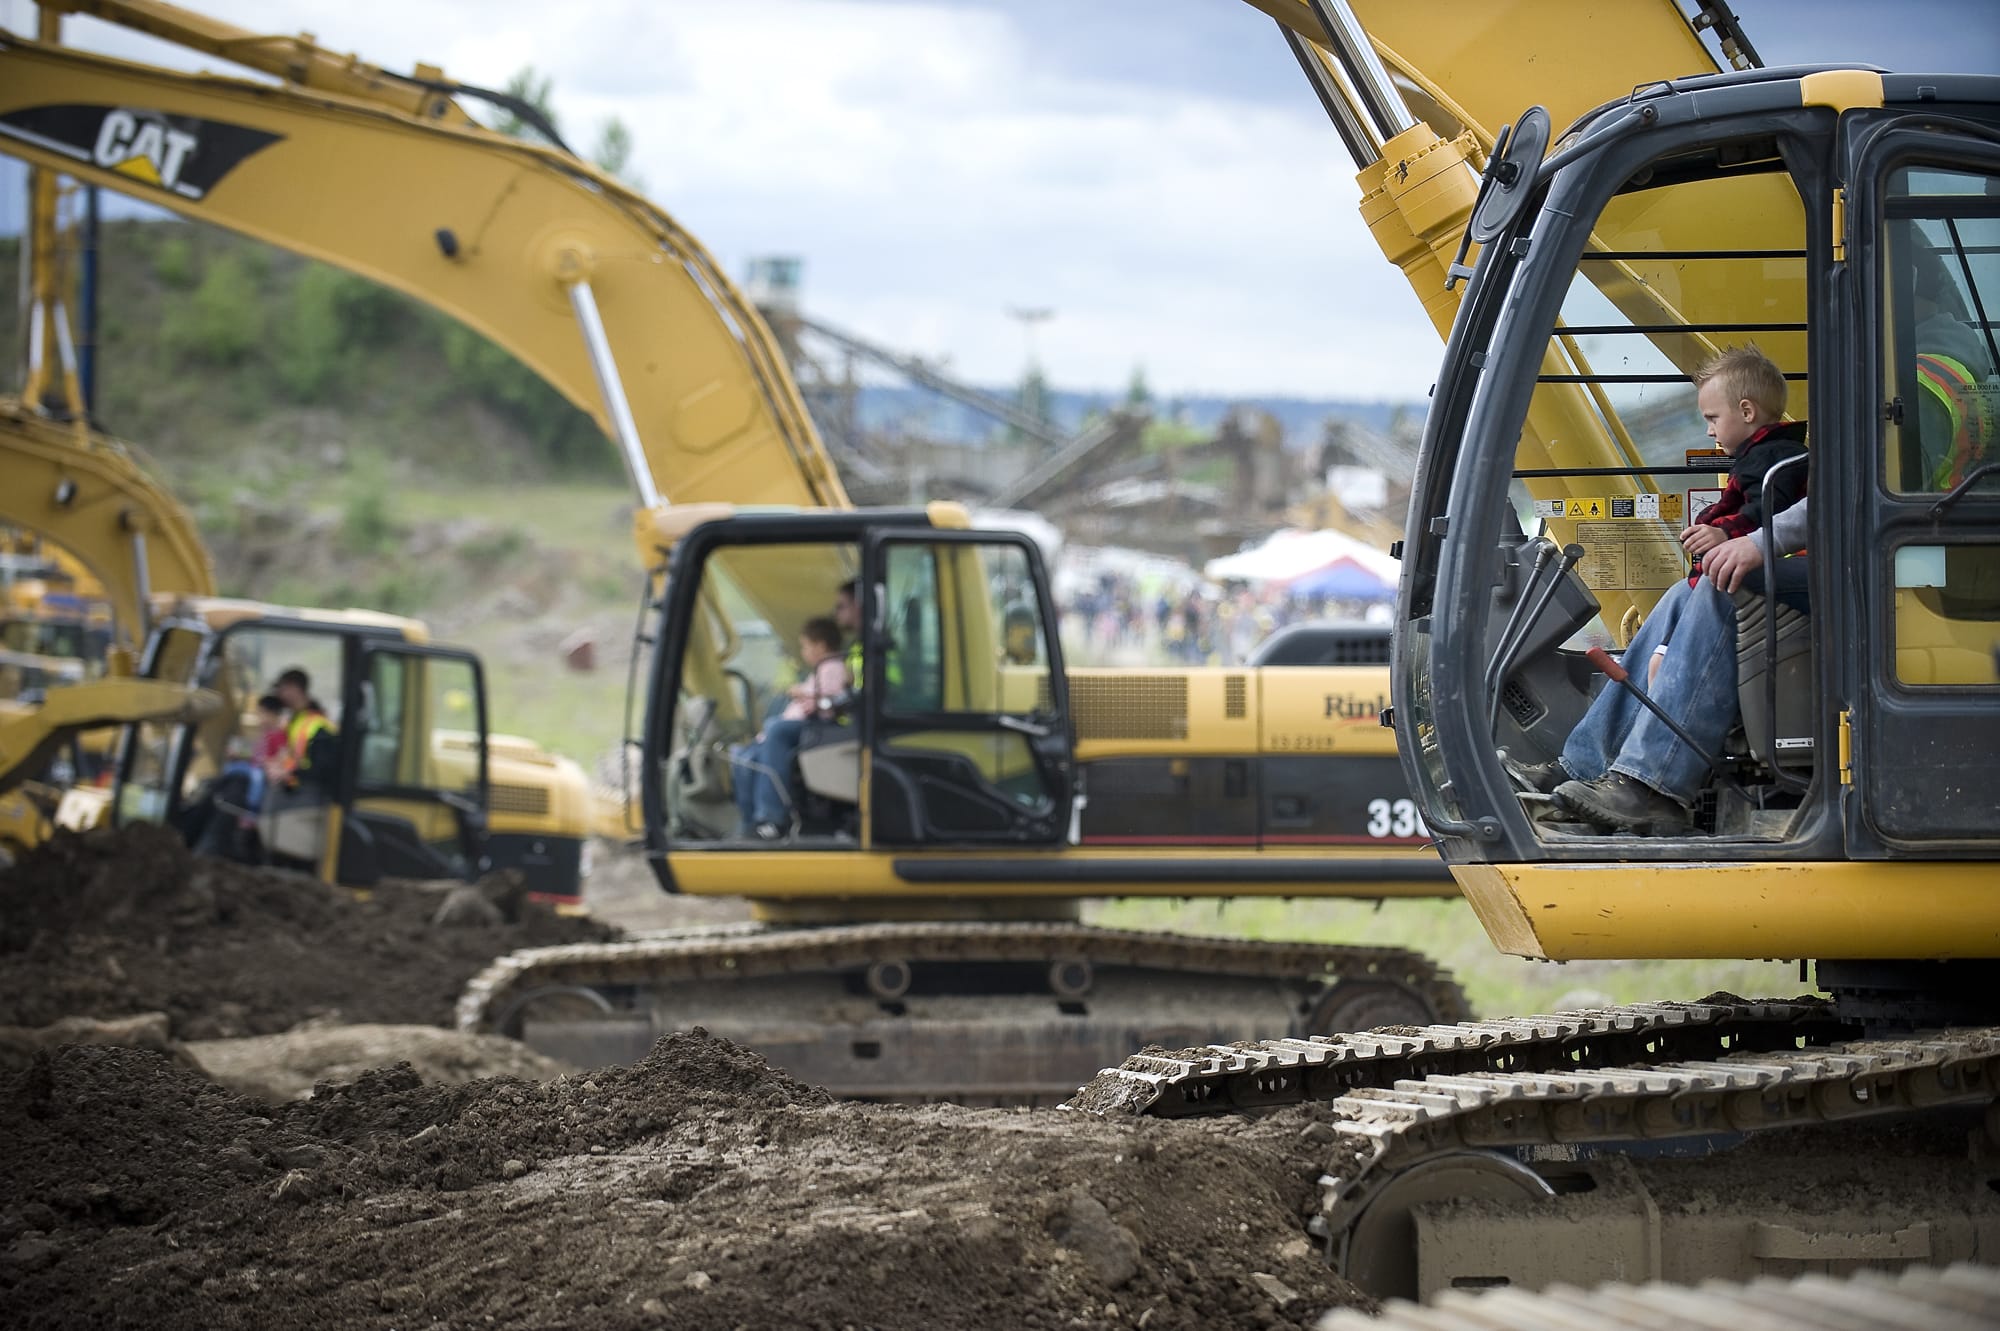 Ryder Loftis operates an excavator with help from operator Curt Spragg at Dozer Day in 2011.